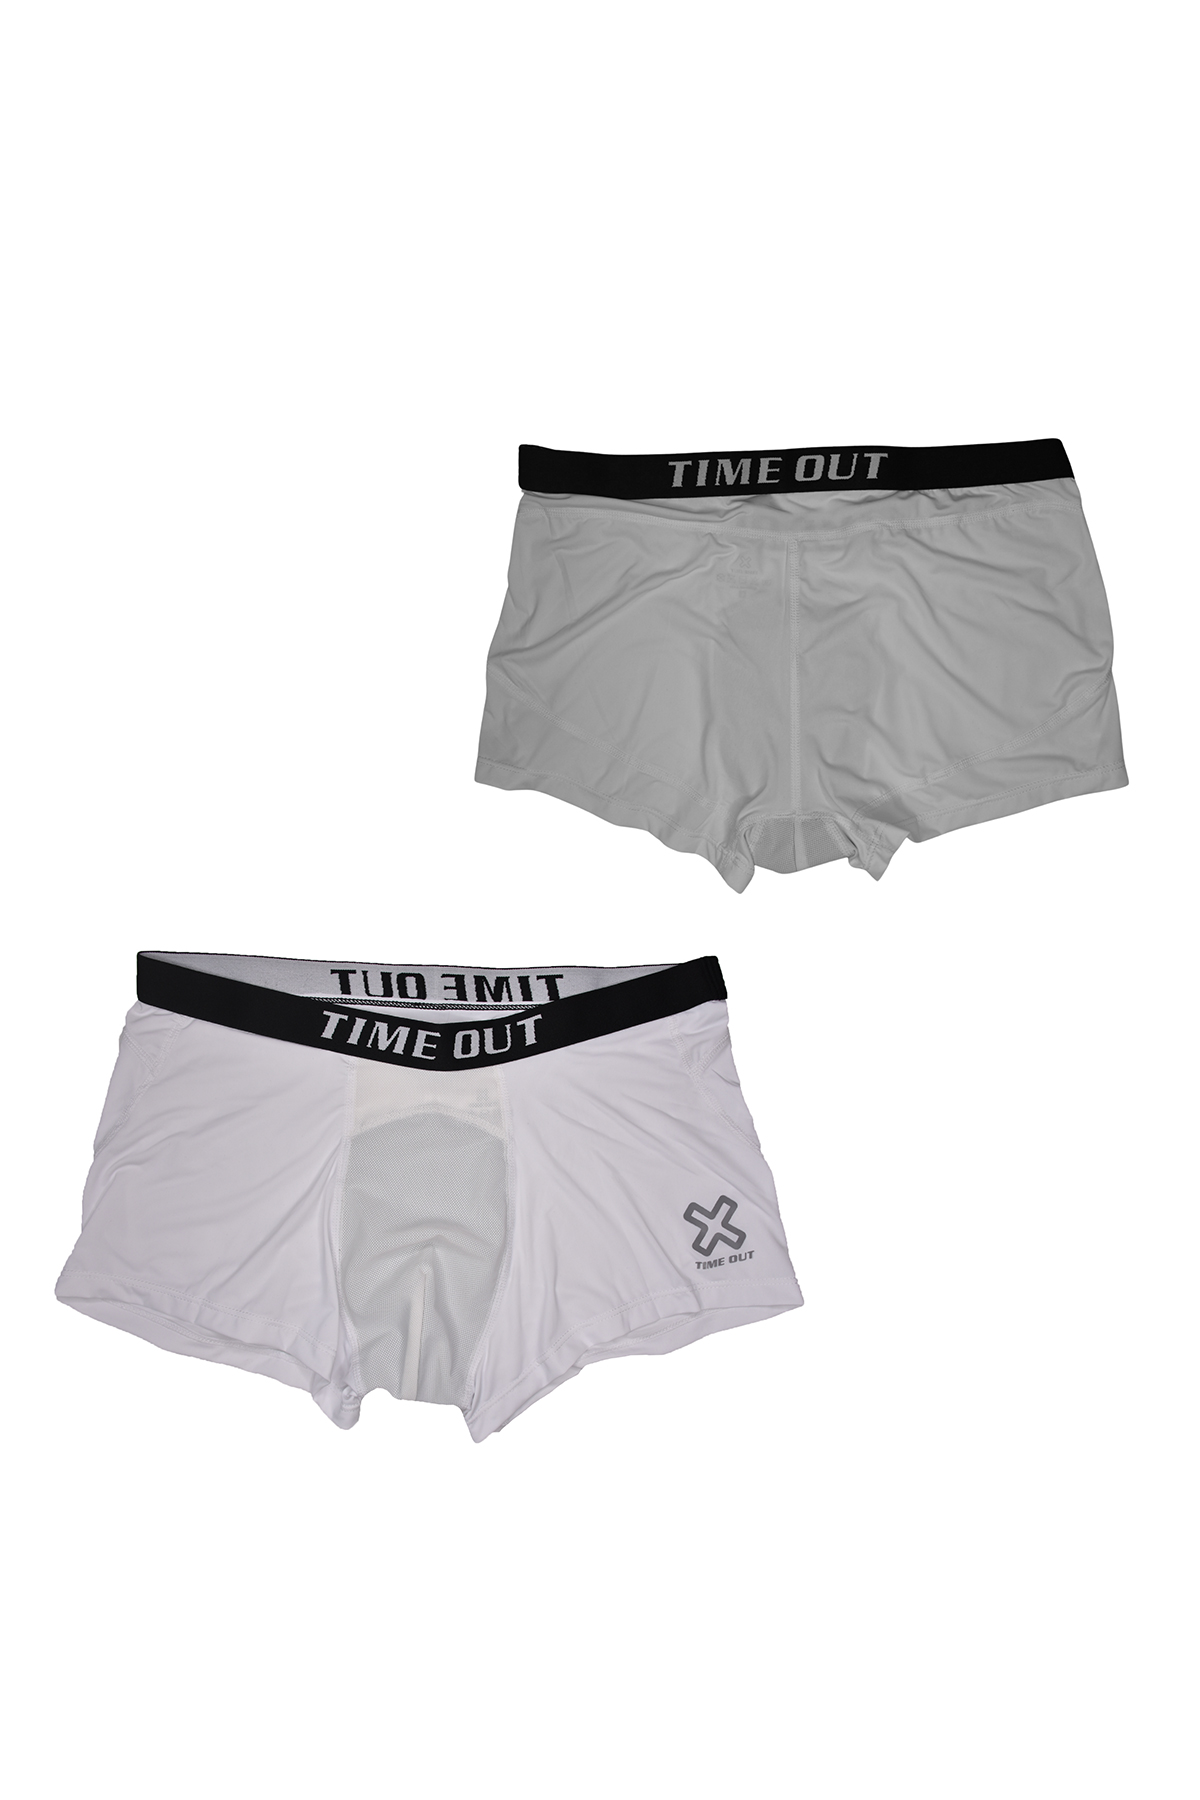 Time-Out-X-Men’s-Activewear-Boxers—Front-and-Back